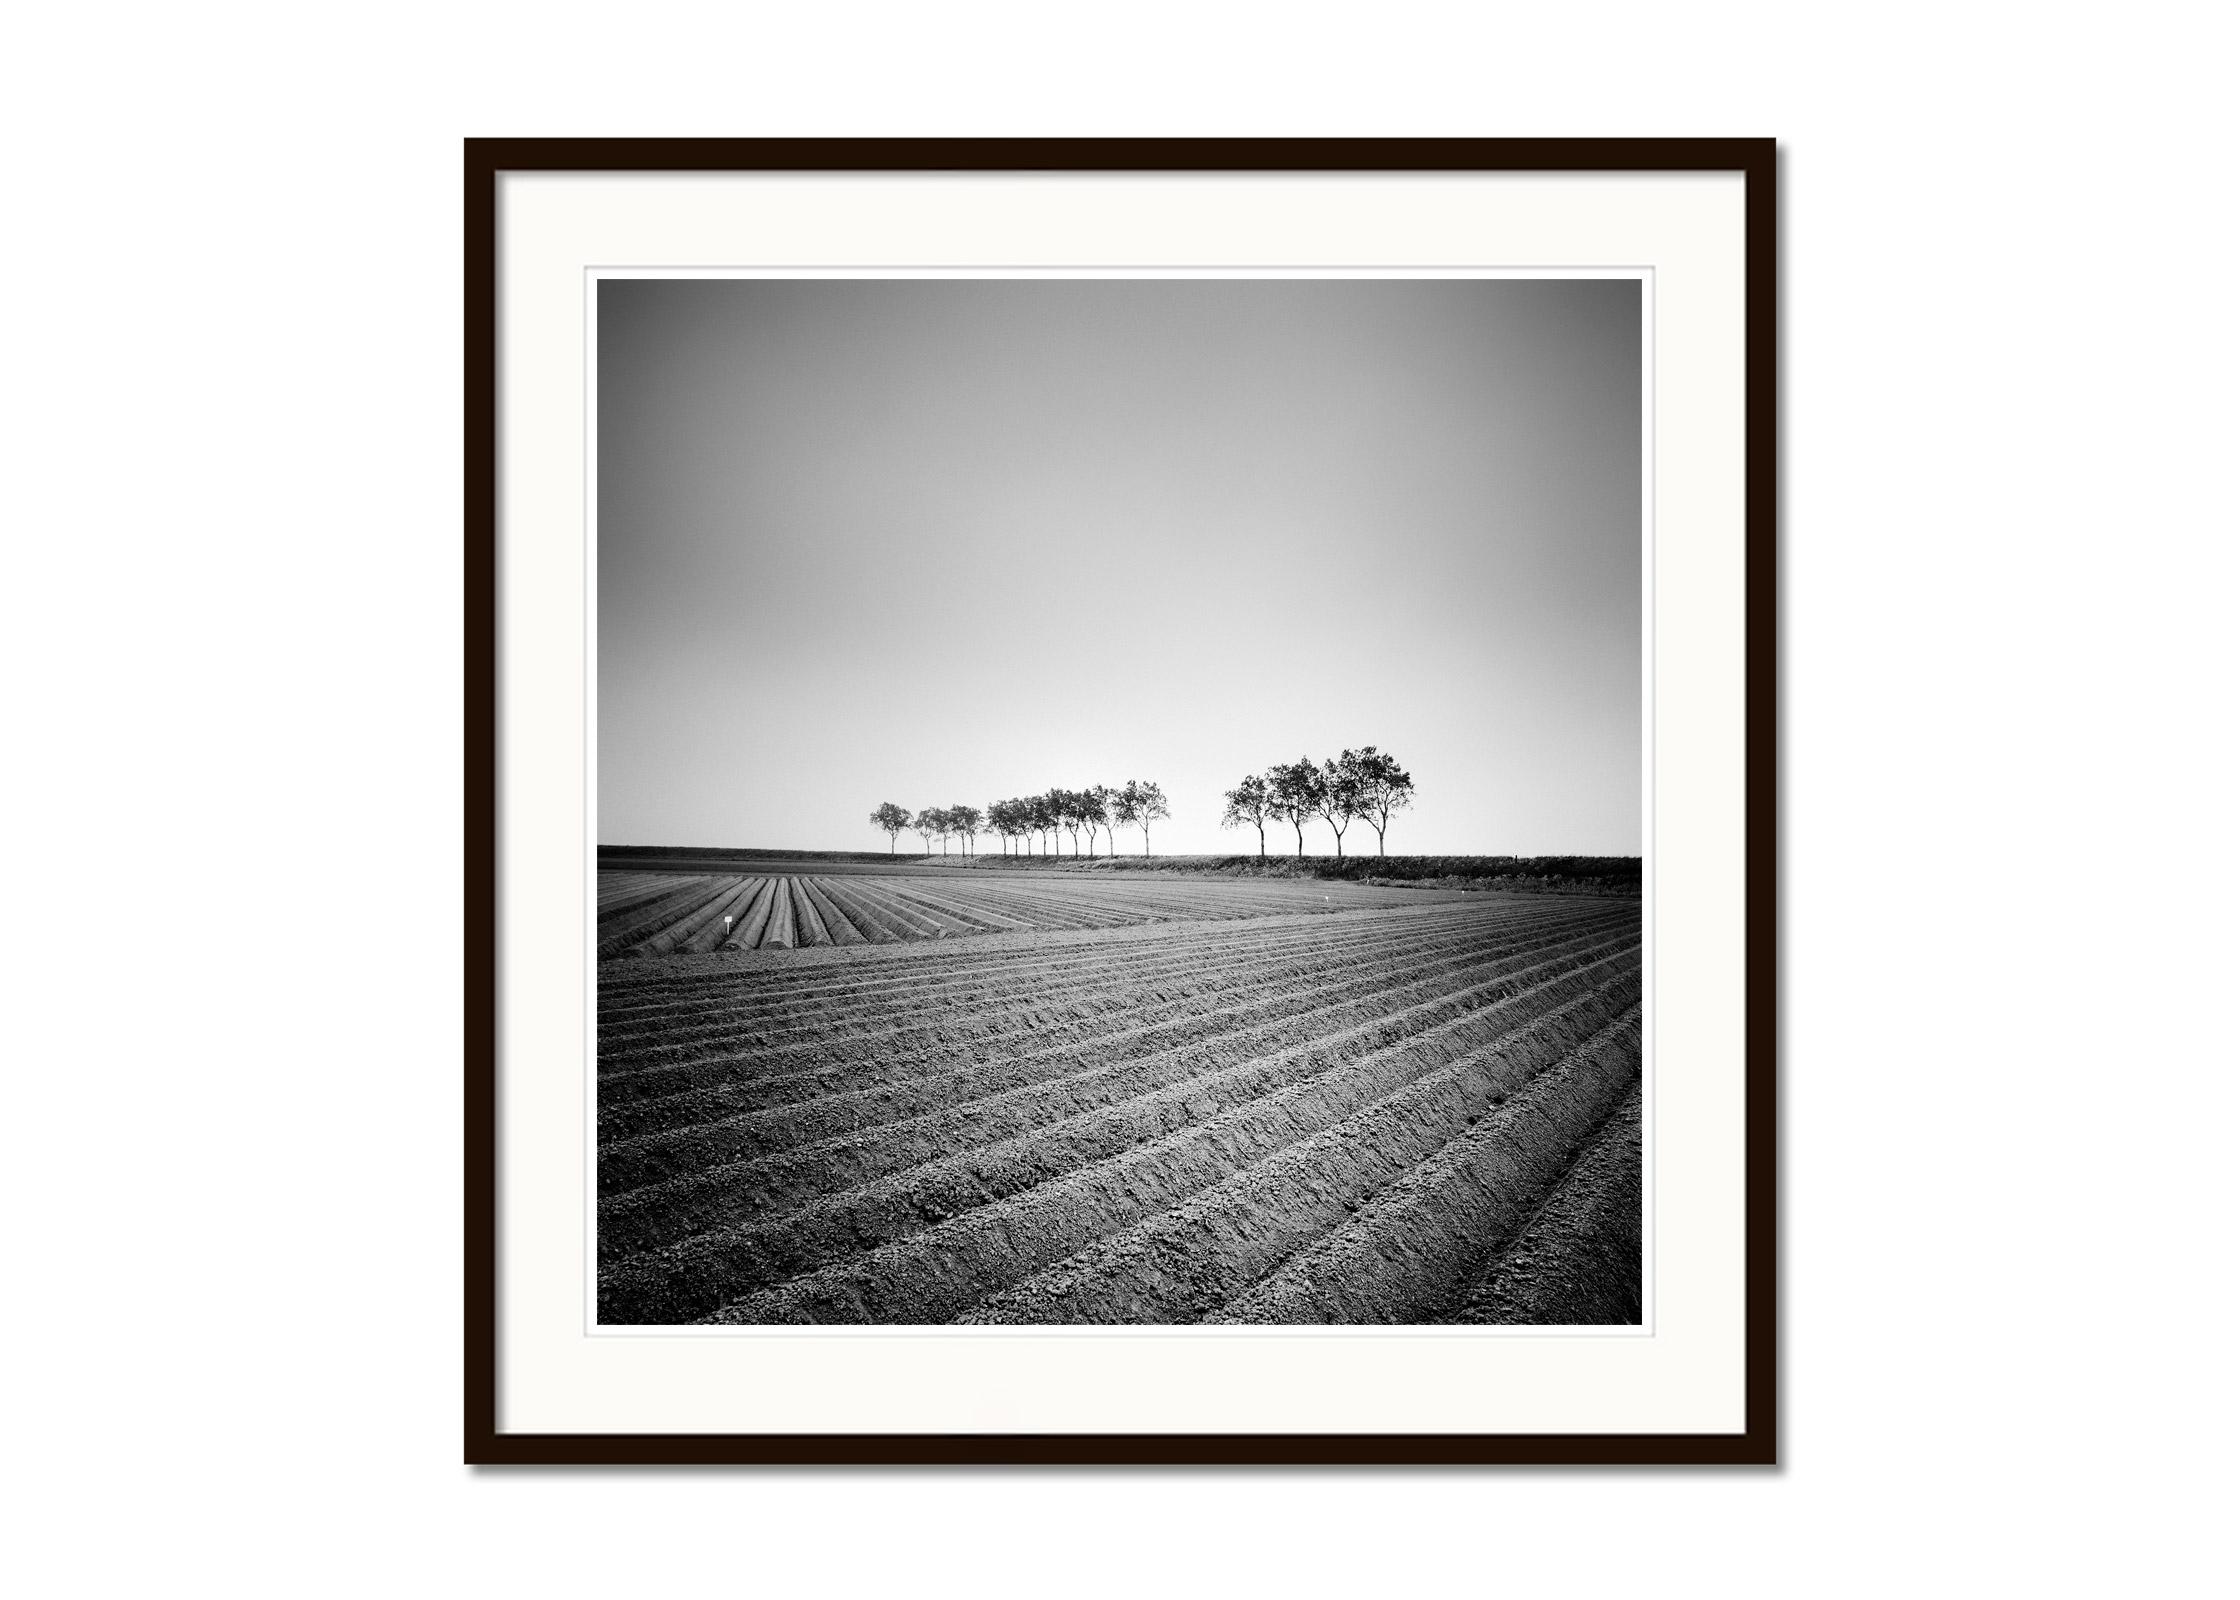 Asparagus Field, Tree Avenue, Netherlands, Black and White landscape photography - Gray Black and White Photograph by Gerald Berghammer